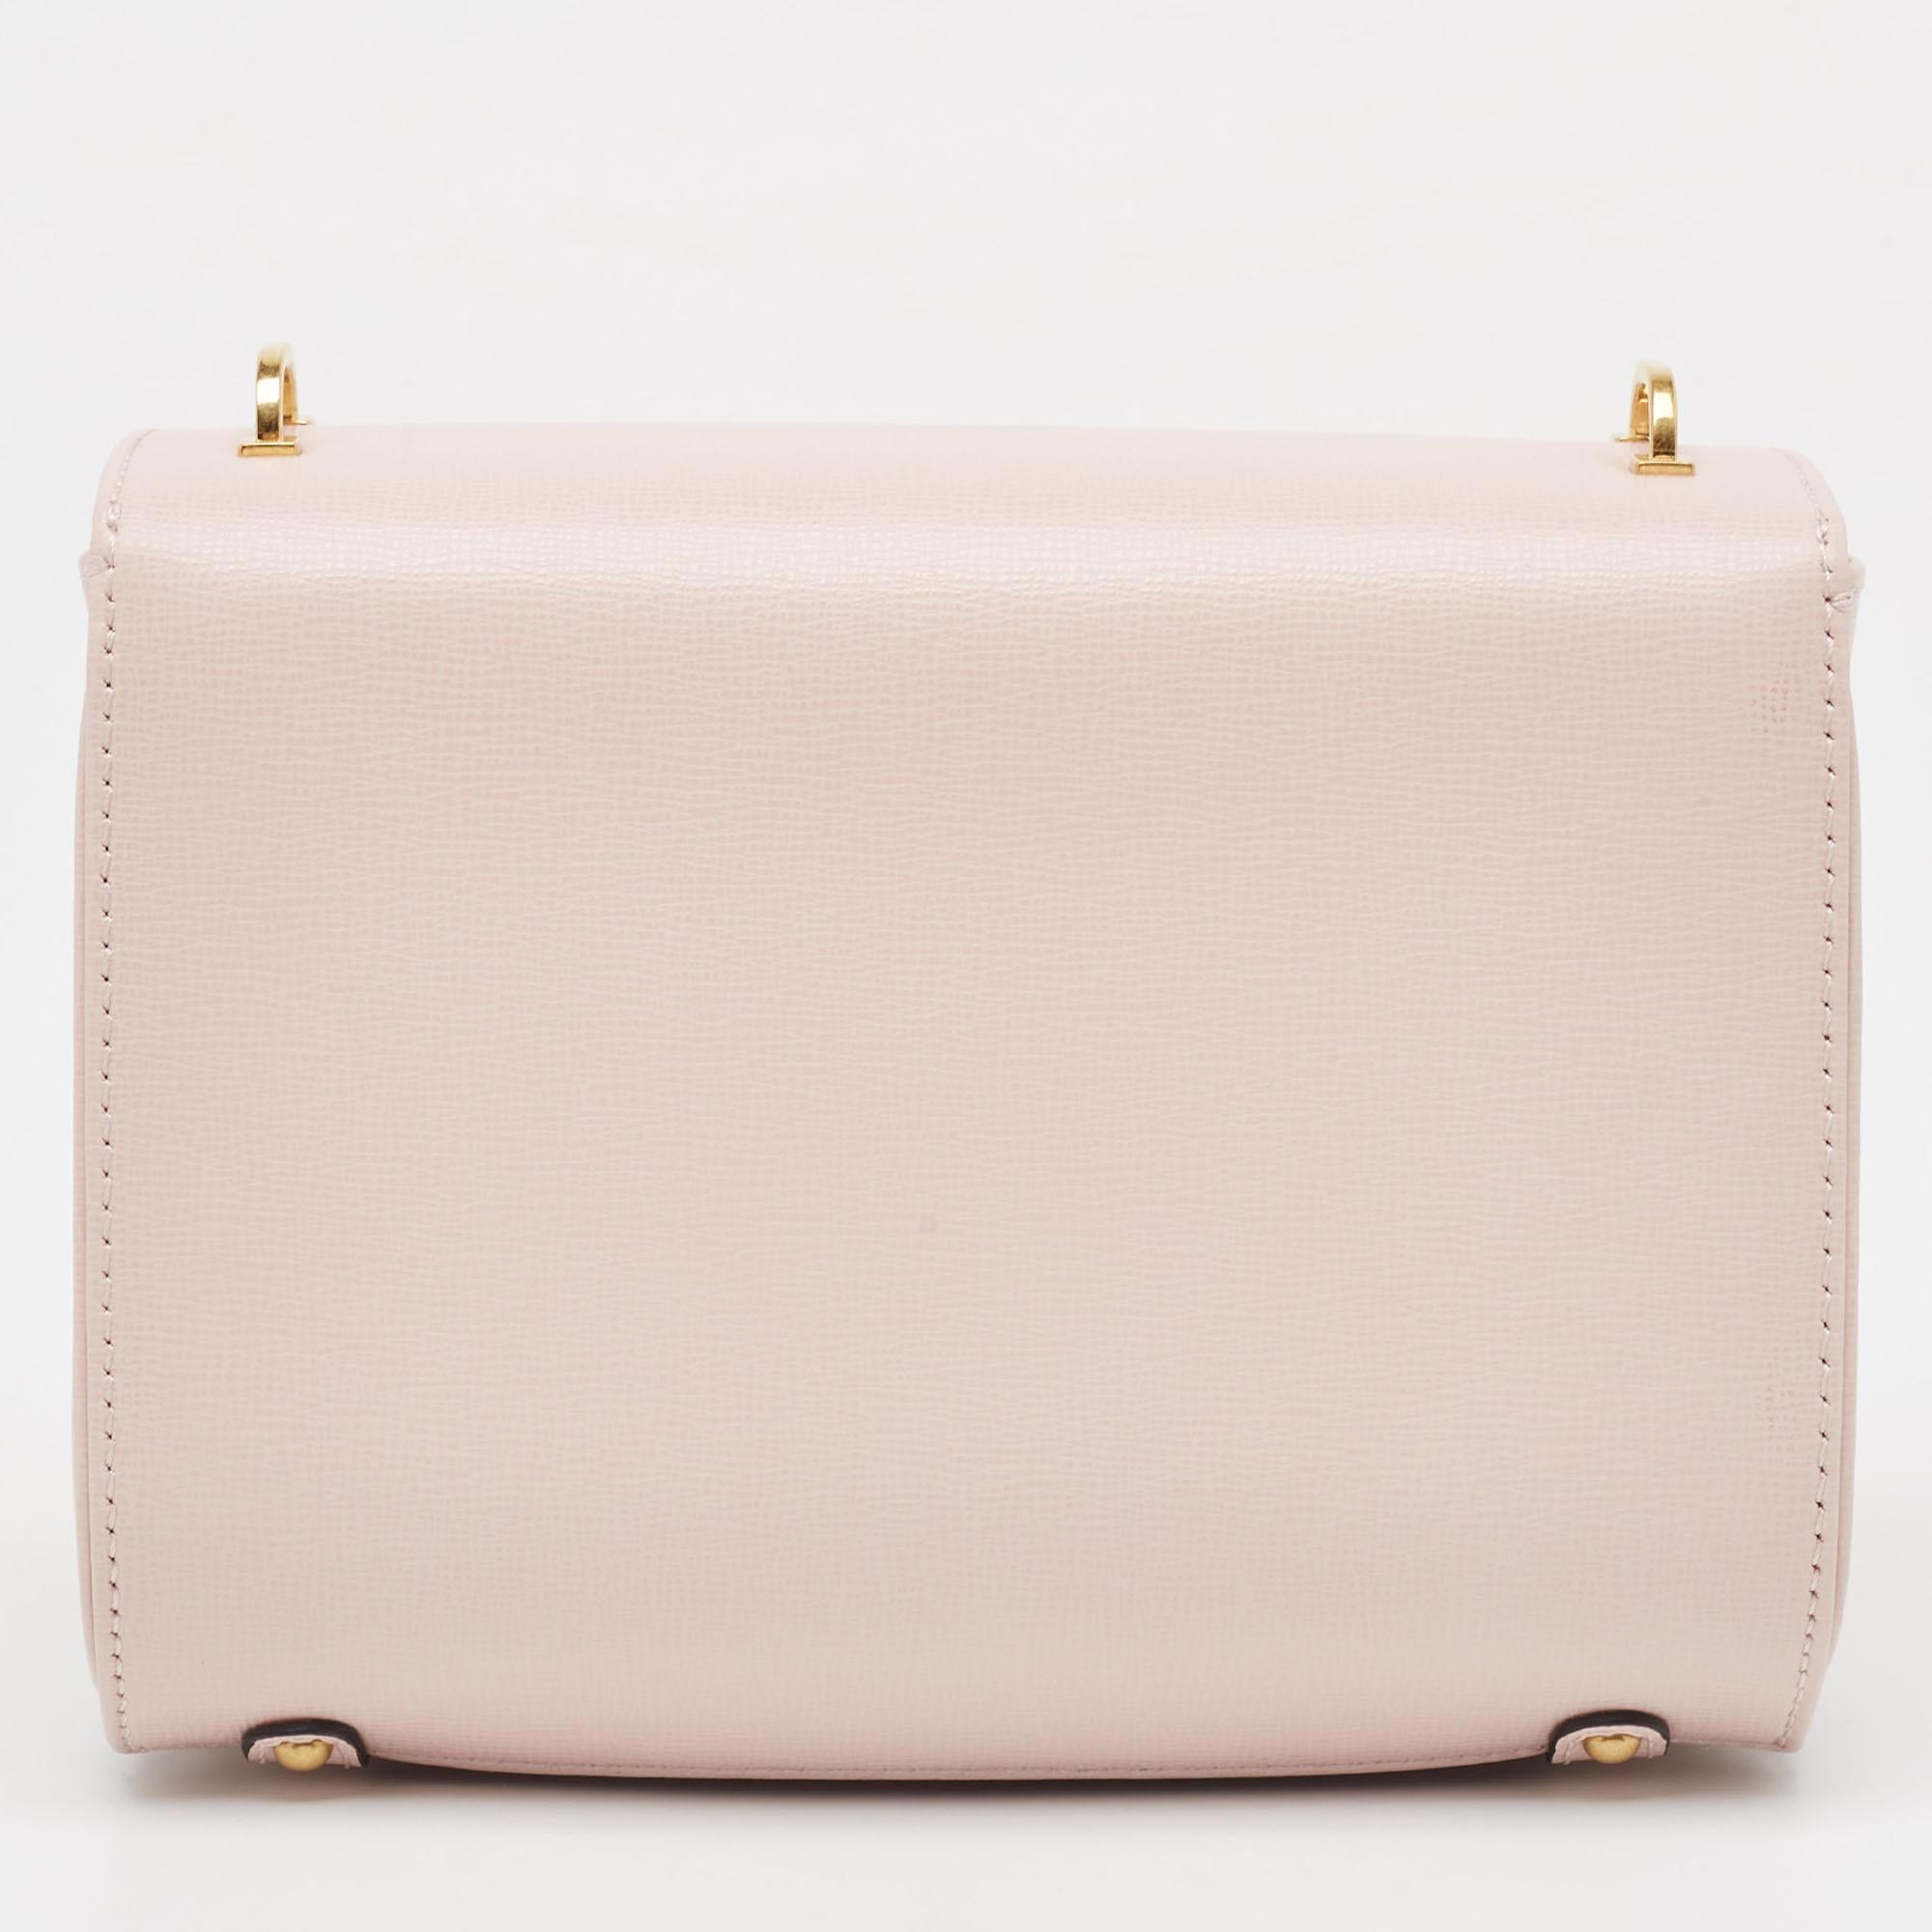 The Valentino bag exudes elegance with its soft pink hue and luxurious leather construction. Adorned with the iconic VLogo hardware, it features a flap closure for security and a spacious interior, making it both chic and practical for everyday